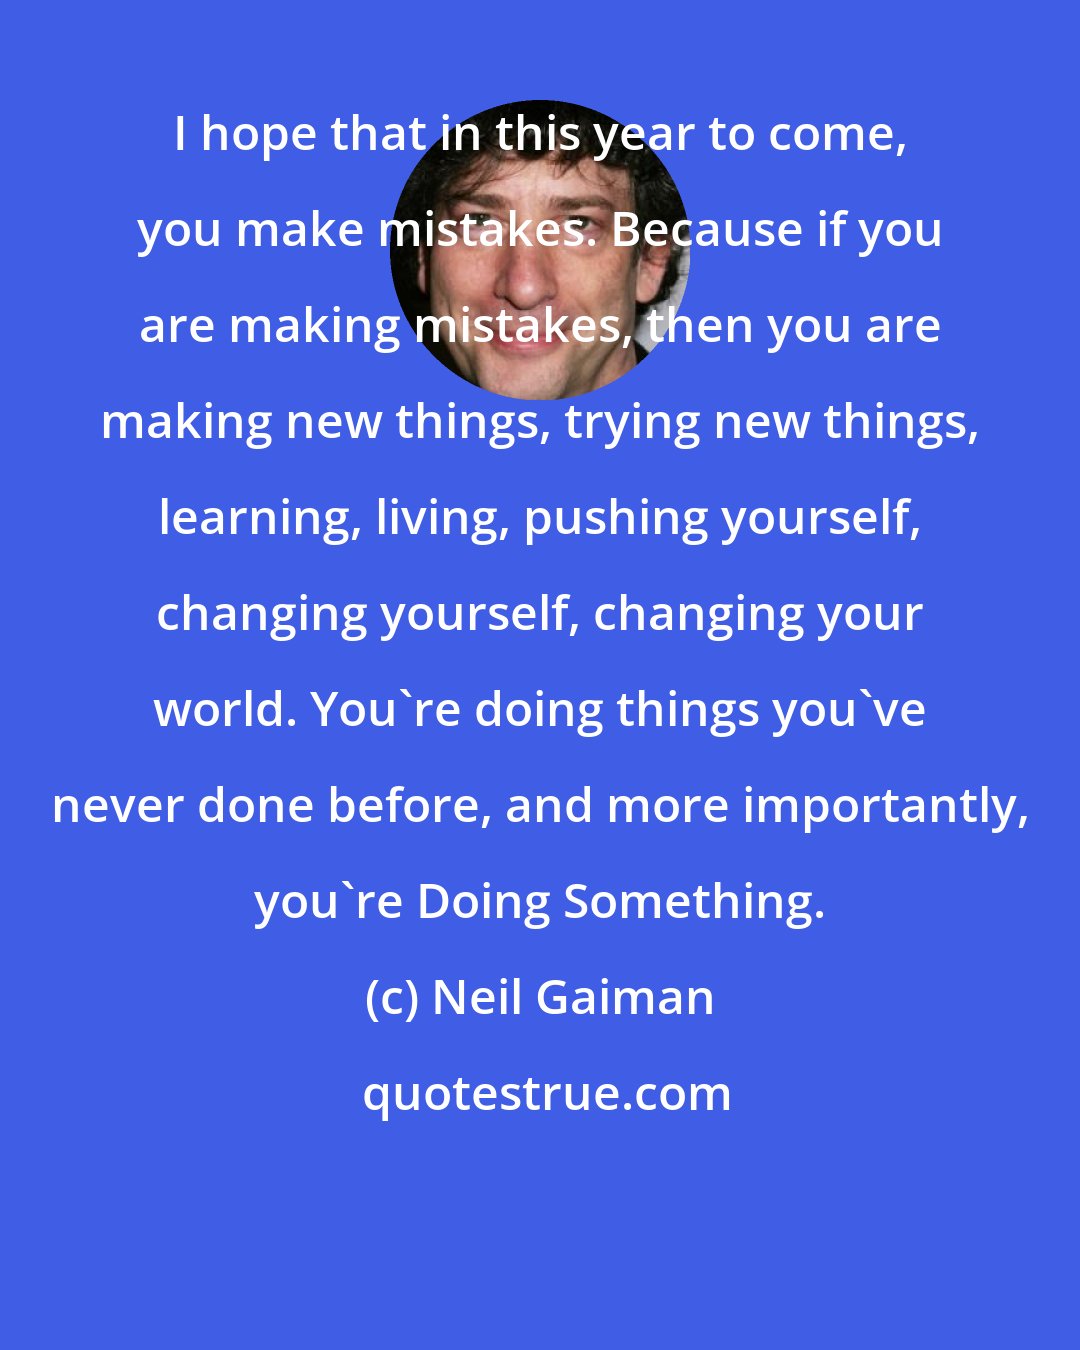 Neil Gaiman: I hope that in this year to come, you make mistakes. Because if you are making mistakes, then you are making new things, trying new things, learning, living, pushing yourself, changing yourself, changing your world. You're doing things you've never done before, and more importantly, you're Doing Something.